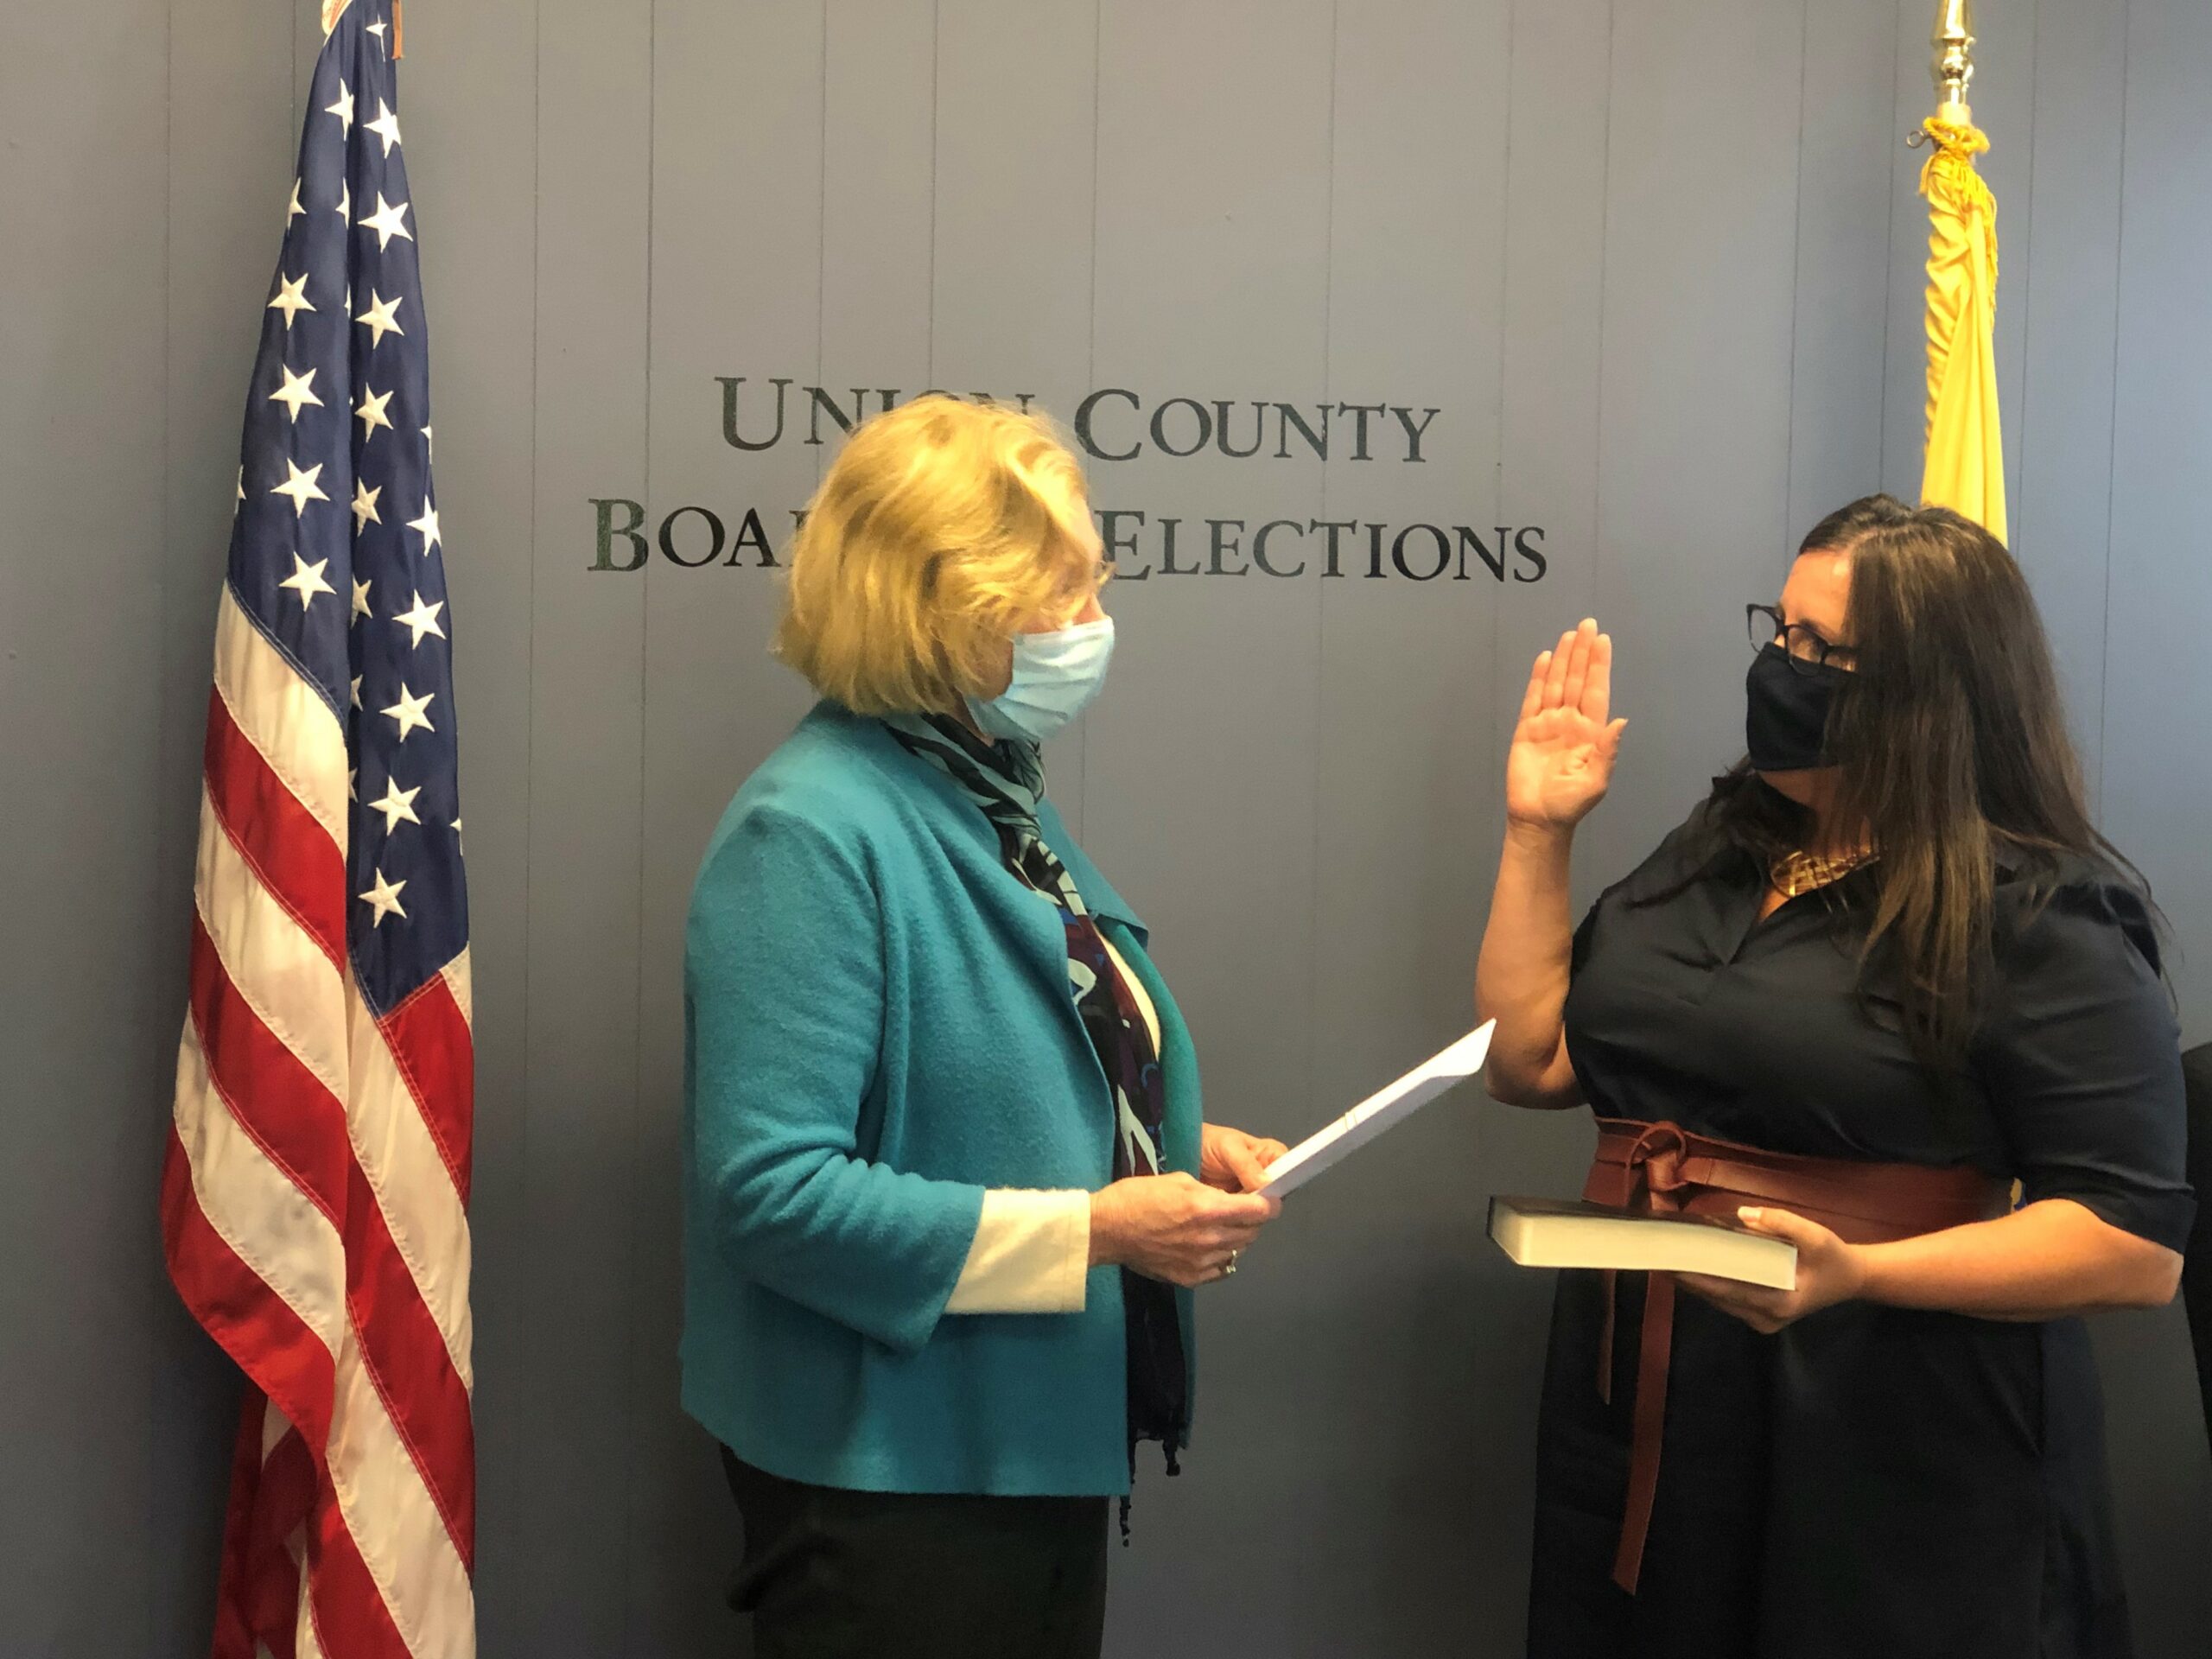 Debra Varnerin of Berkeley Heights takes the oath of office to serve as a Commissioner